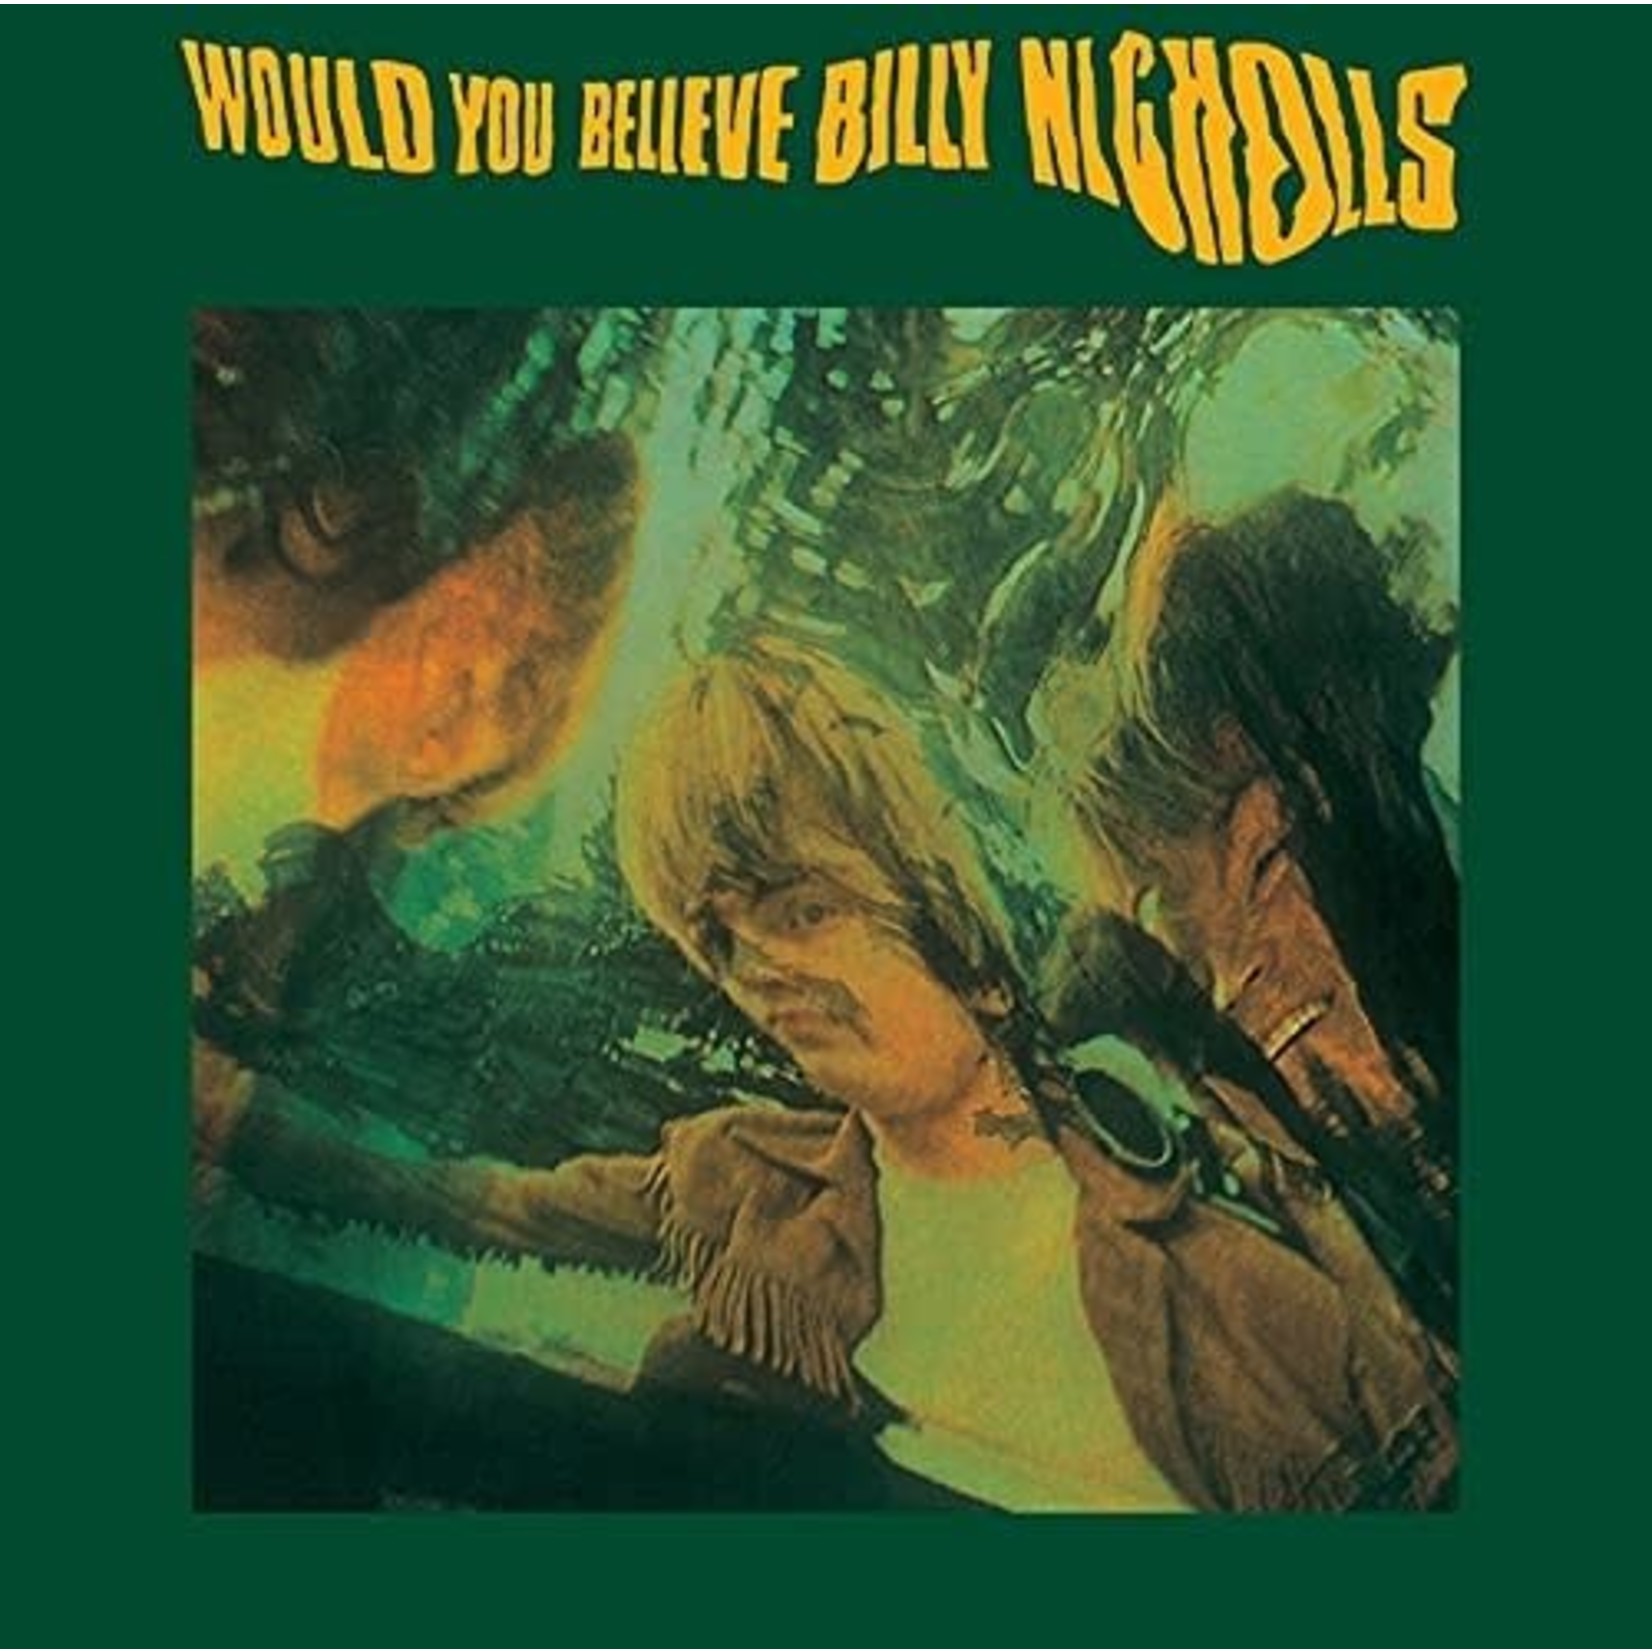 Vinyl Billy Nicholls - Would You Believe?   (Now Deleted)